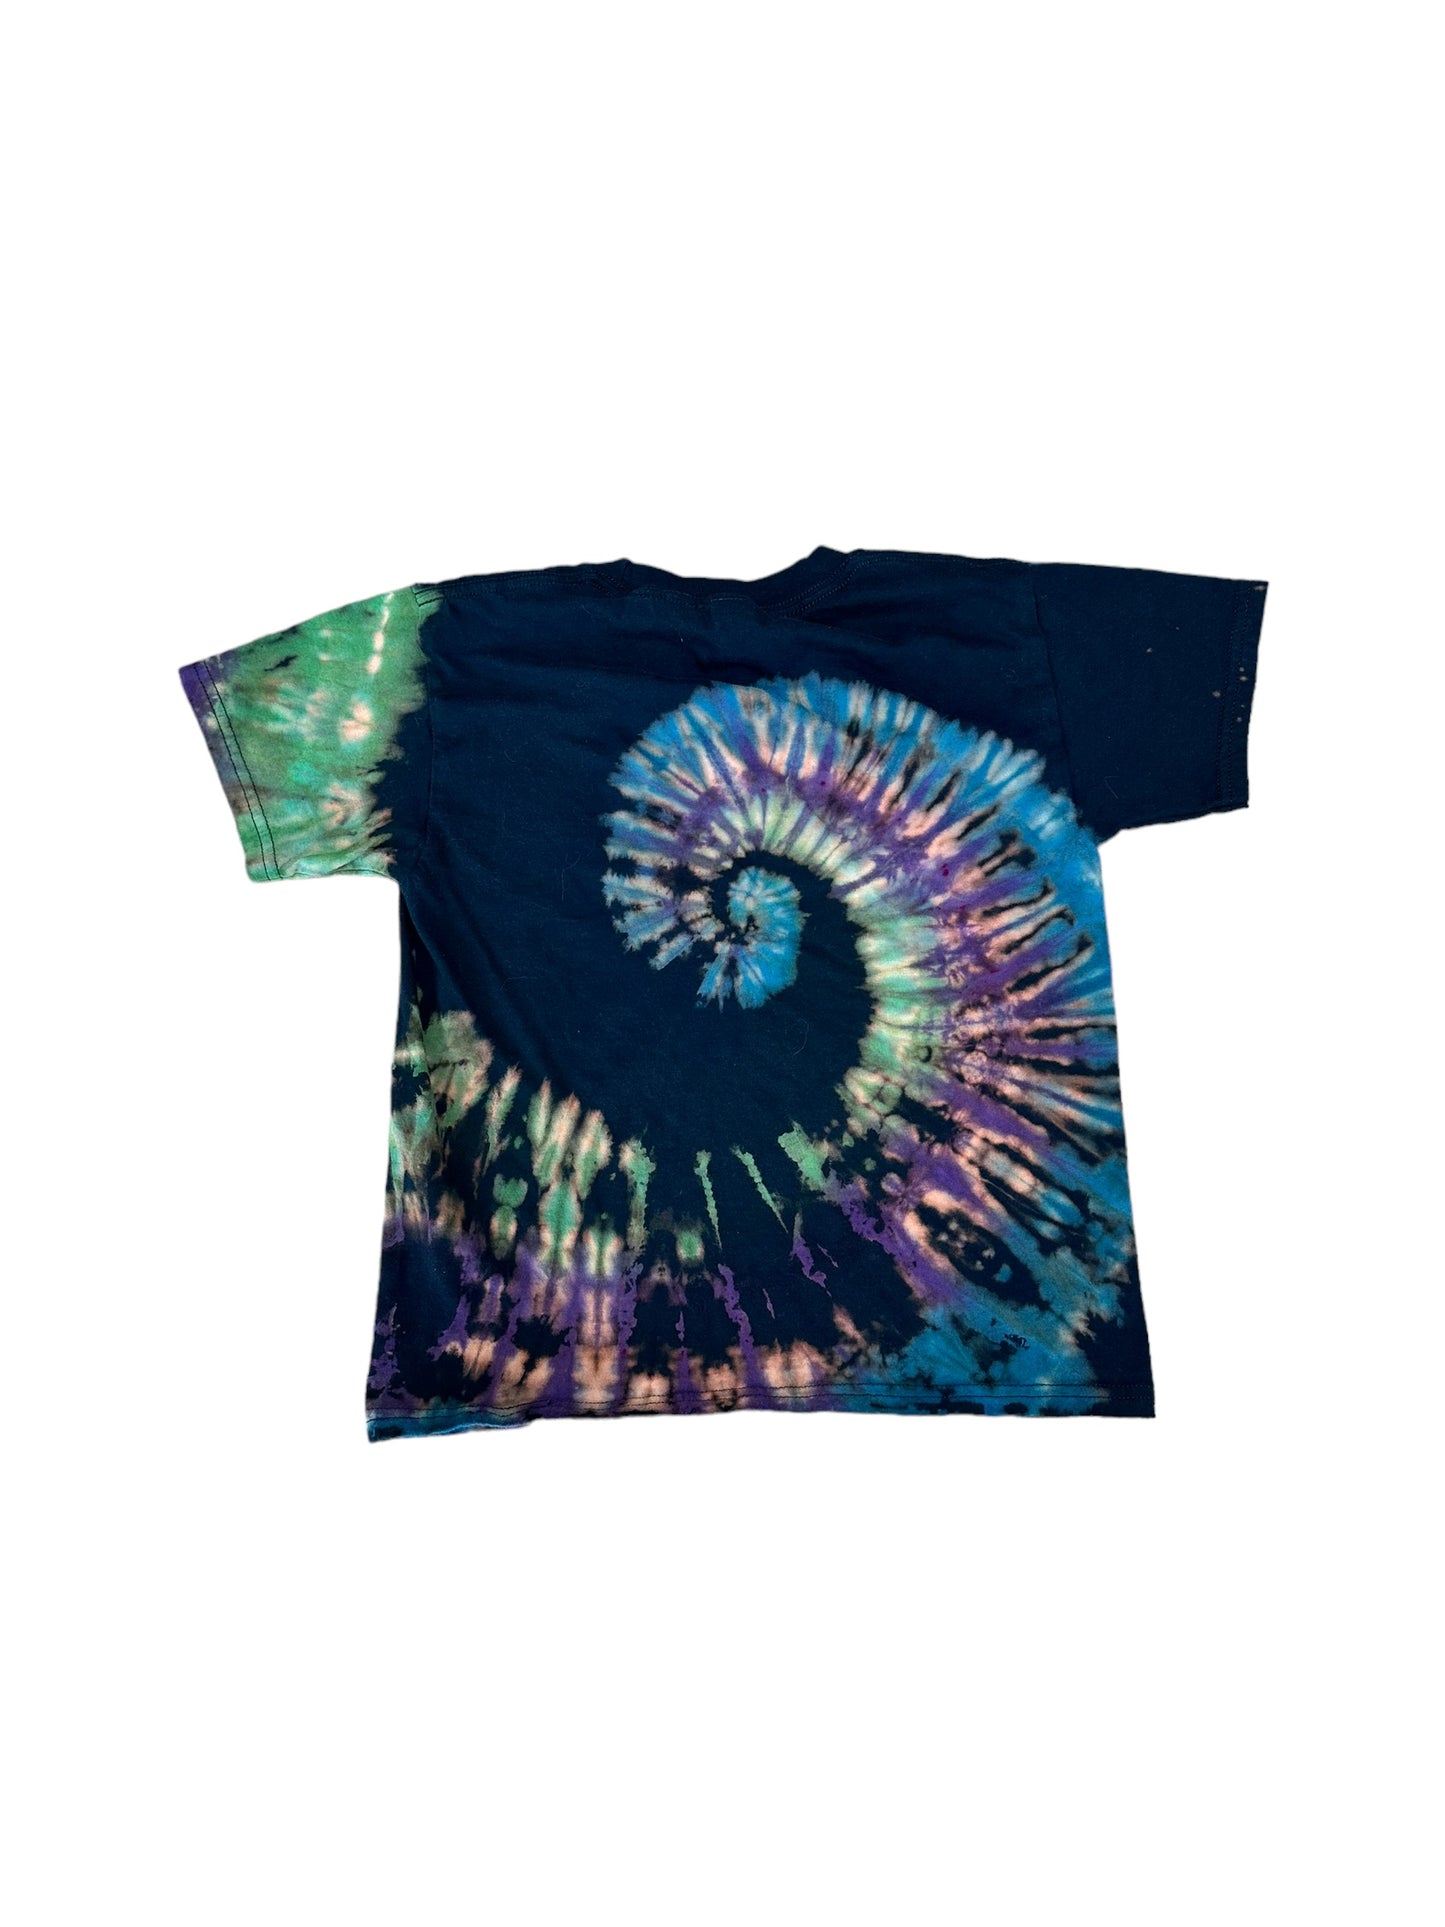 Youth Small Blue Green and Purple Reverse Spiral Tie Dye